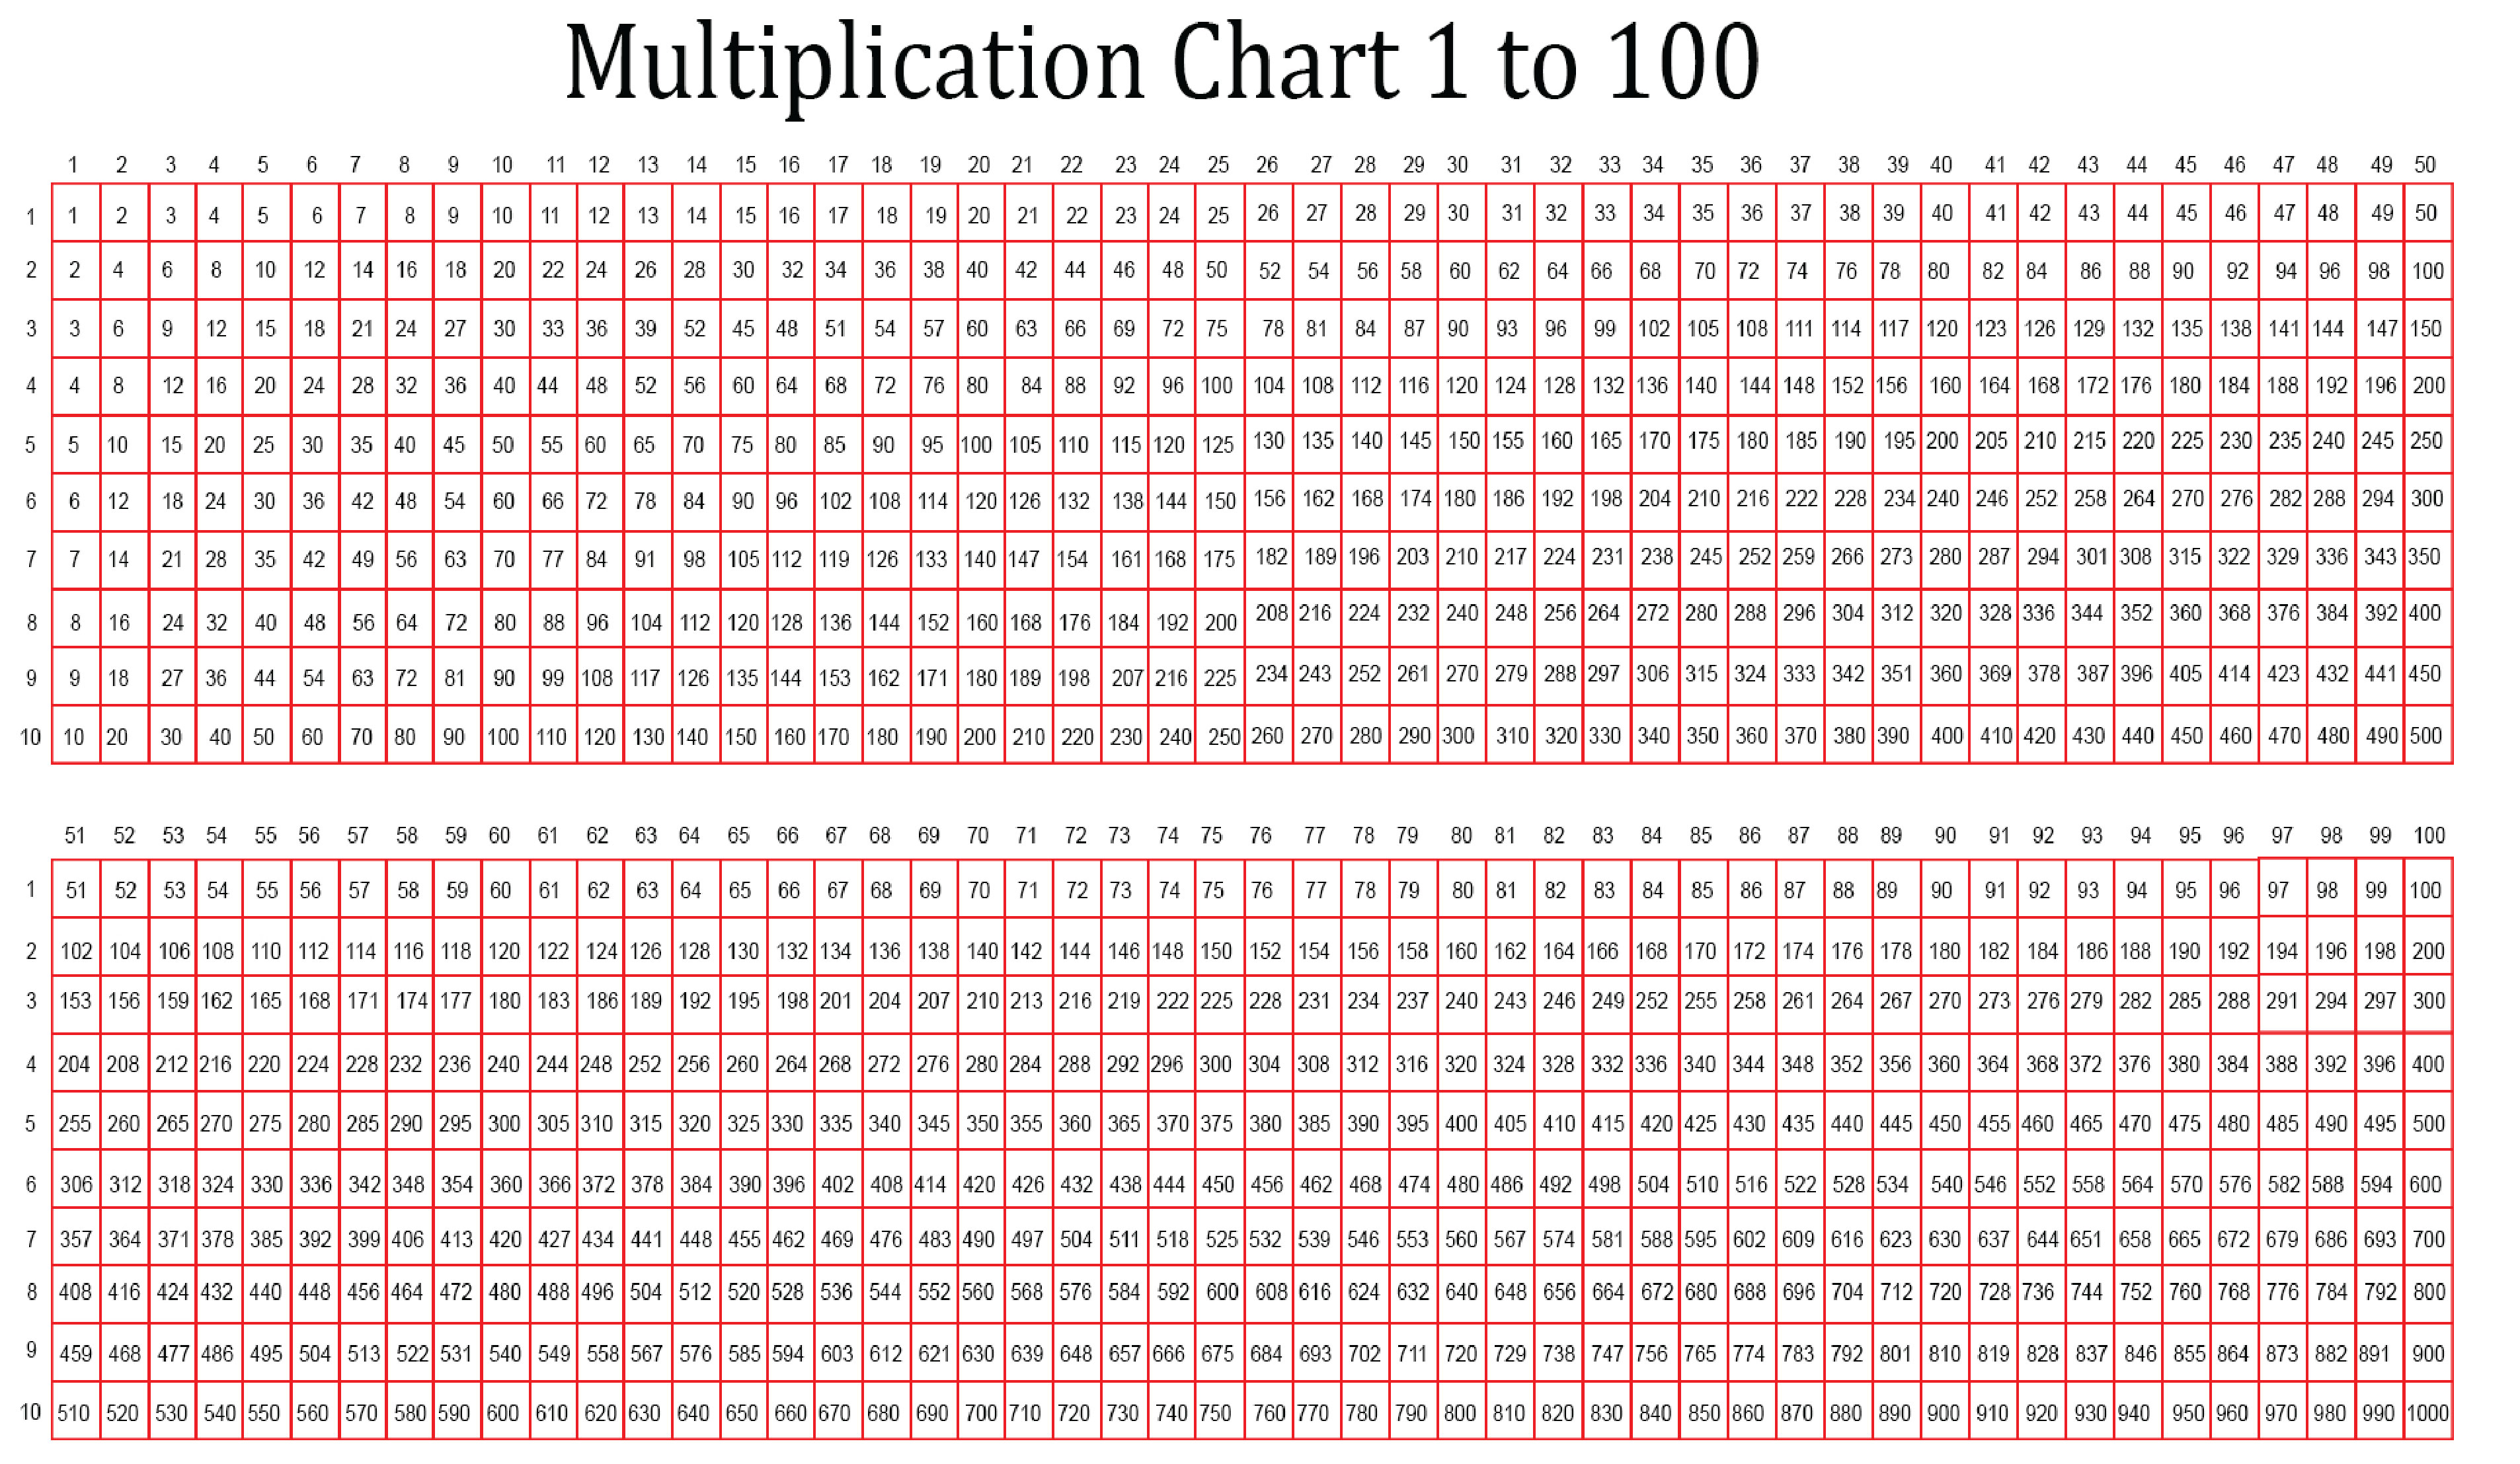 Multiplication Table Chart Up to 100